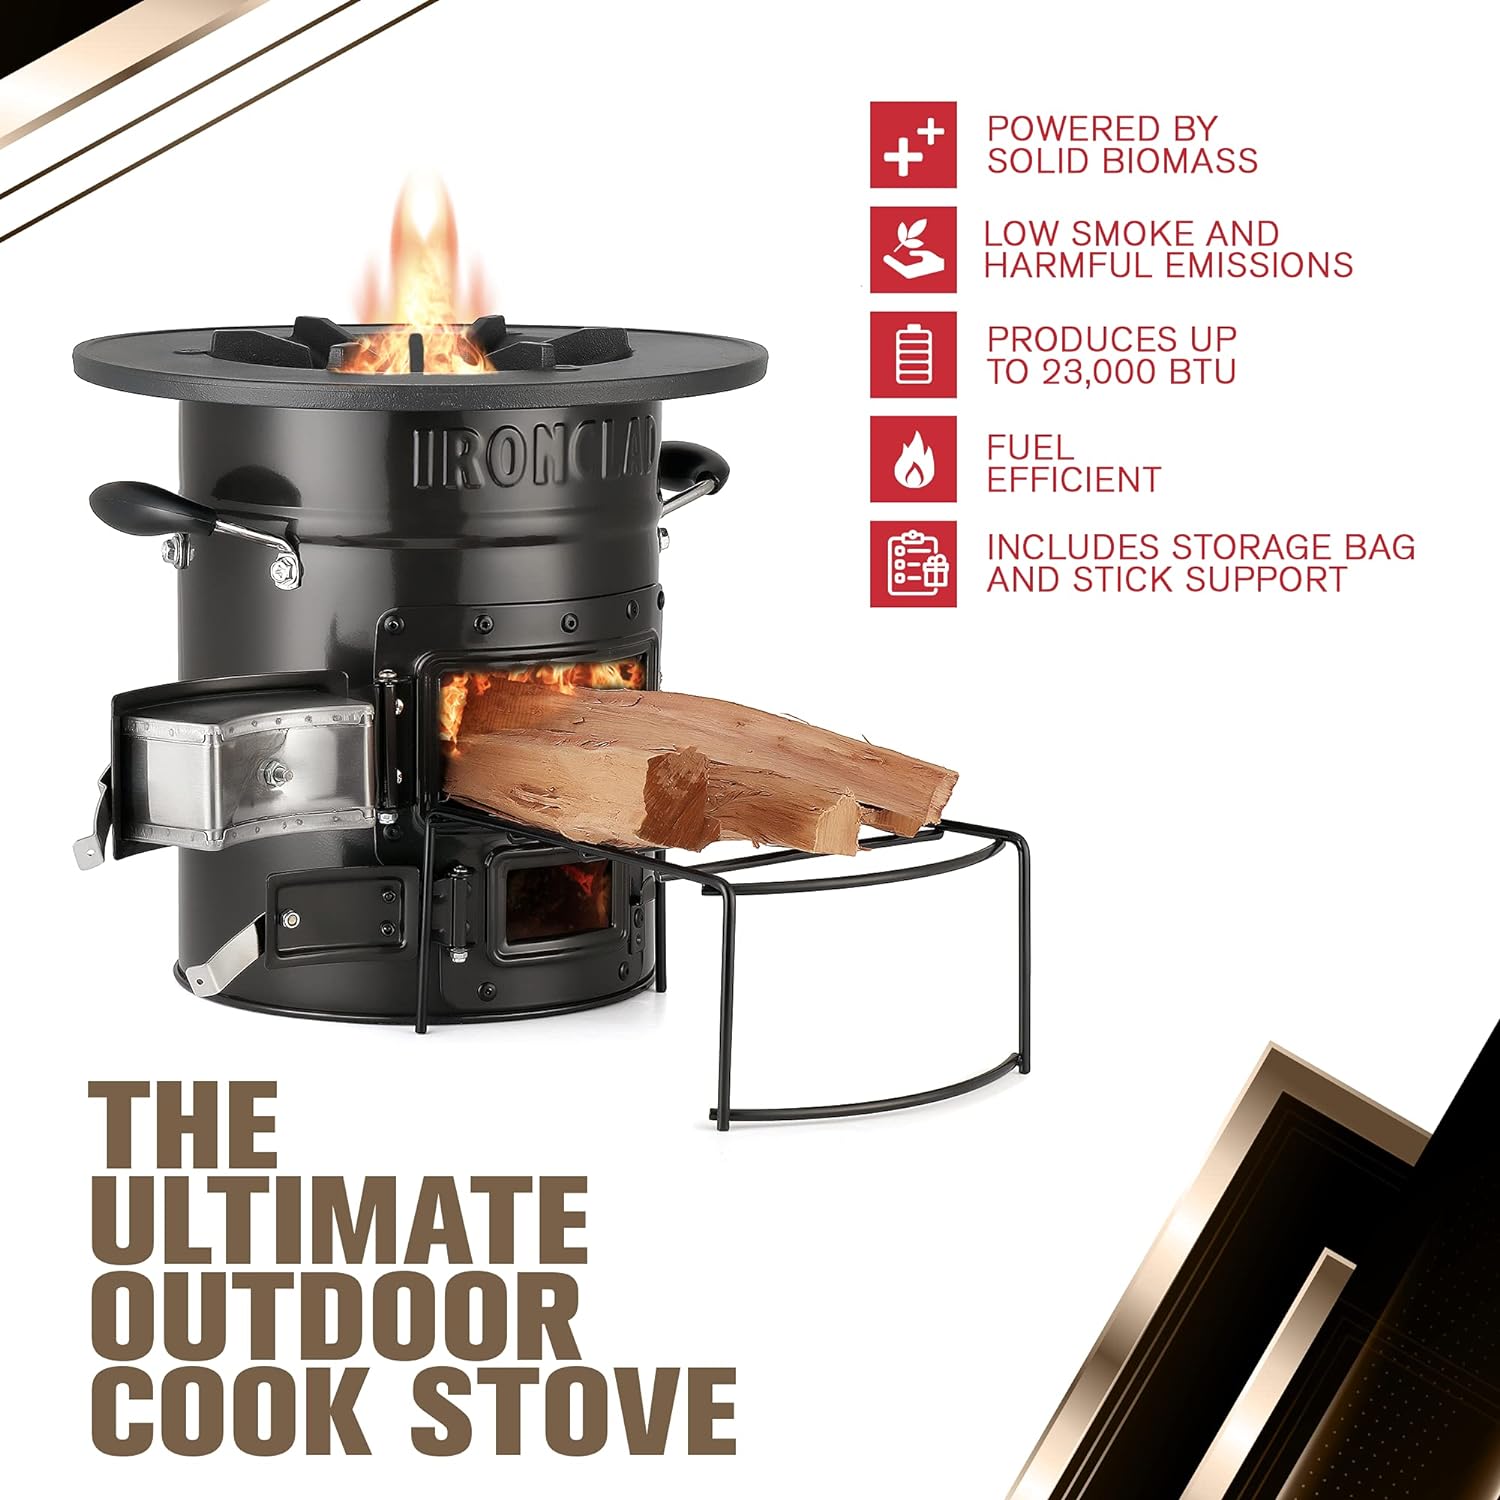 Supply Rocket Stove – Camping Wood Stove for Emergency Preparedness, Survival, off Grid Living Supplies – Portable Wood Burning Stove with Canvas Storage Bag and Fuel Support System